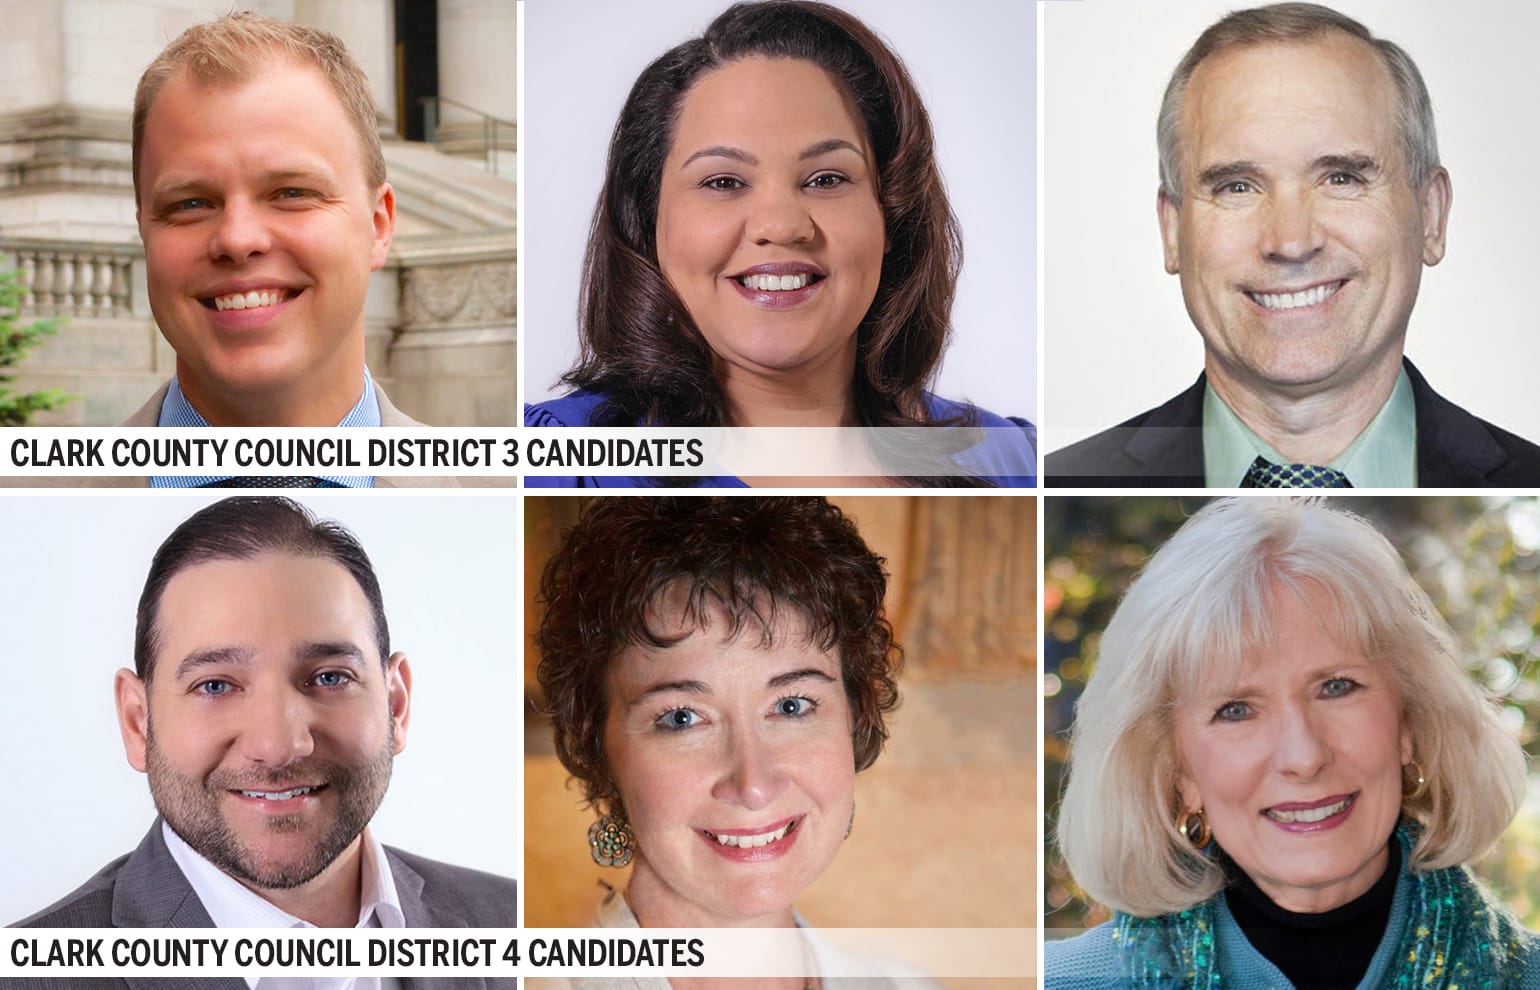 Clark County council candidates for District 3 are (top row from left) John Blom, Tanisha Harris and David Madore, incumbent; and for District 4 are (bottom from from left) Roman Battan, Jennifer McDaniel and Eileen Quiring.